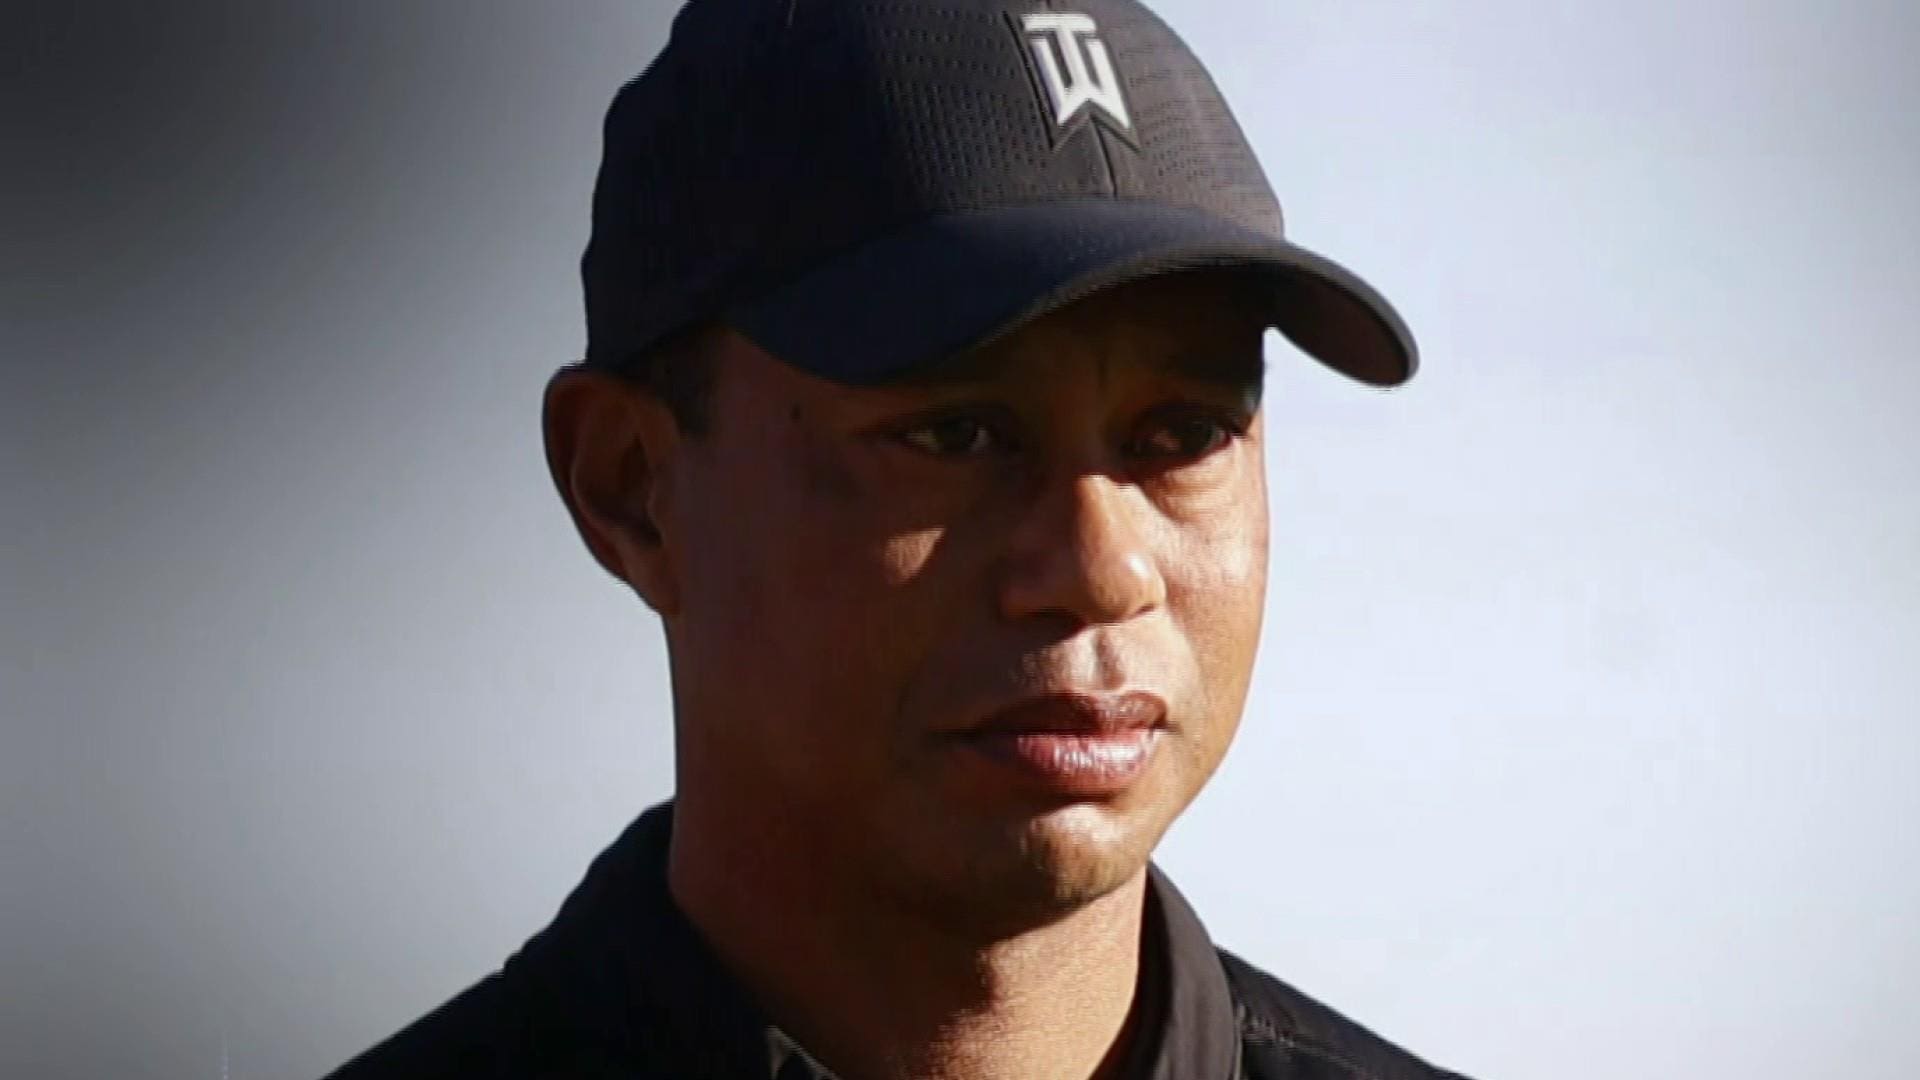 tiger-woods-takes-to-twitter-for-the-first-time-since-his-scary-accident-check-out-his-message